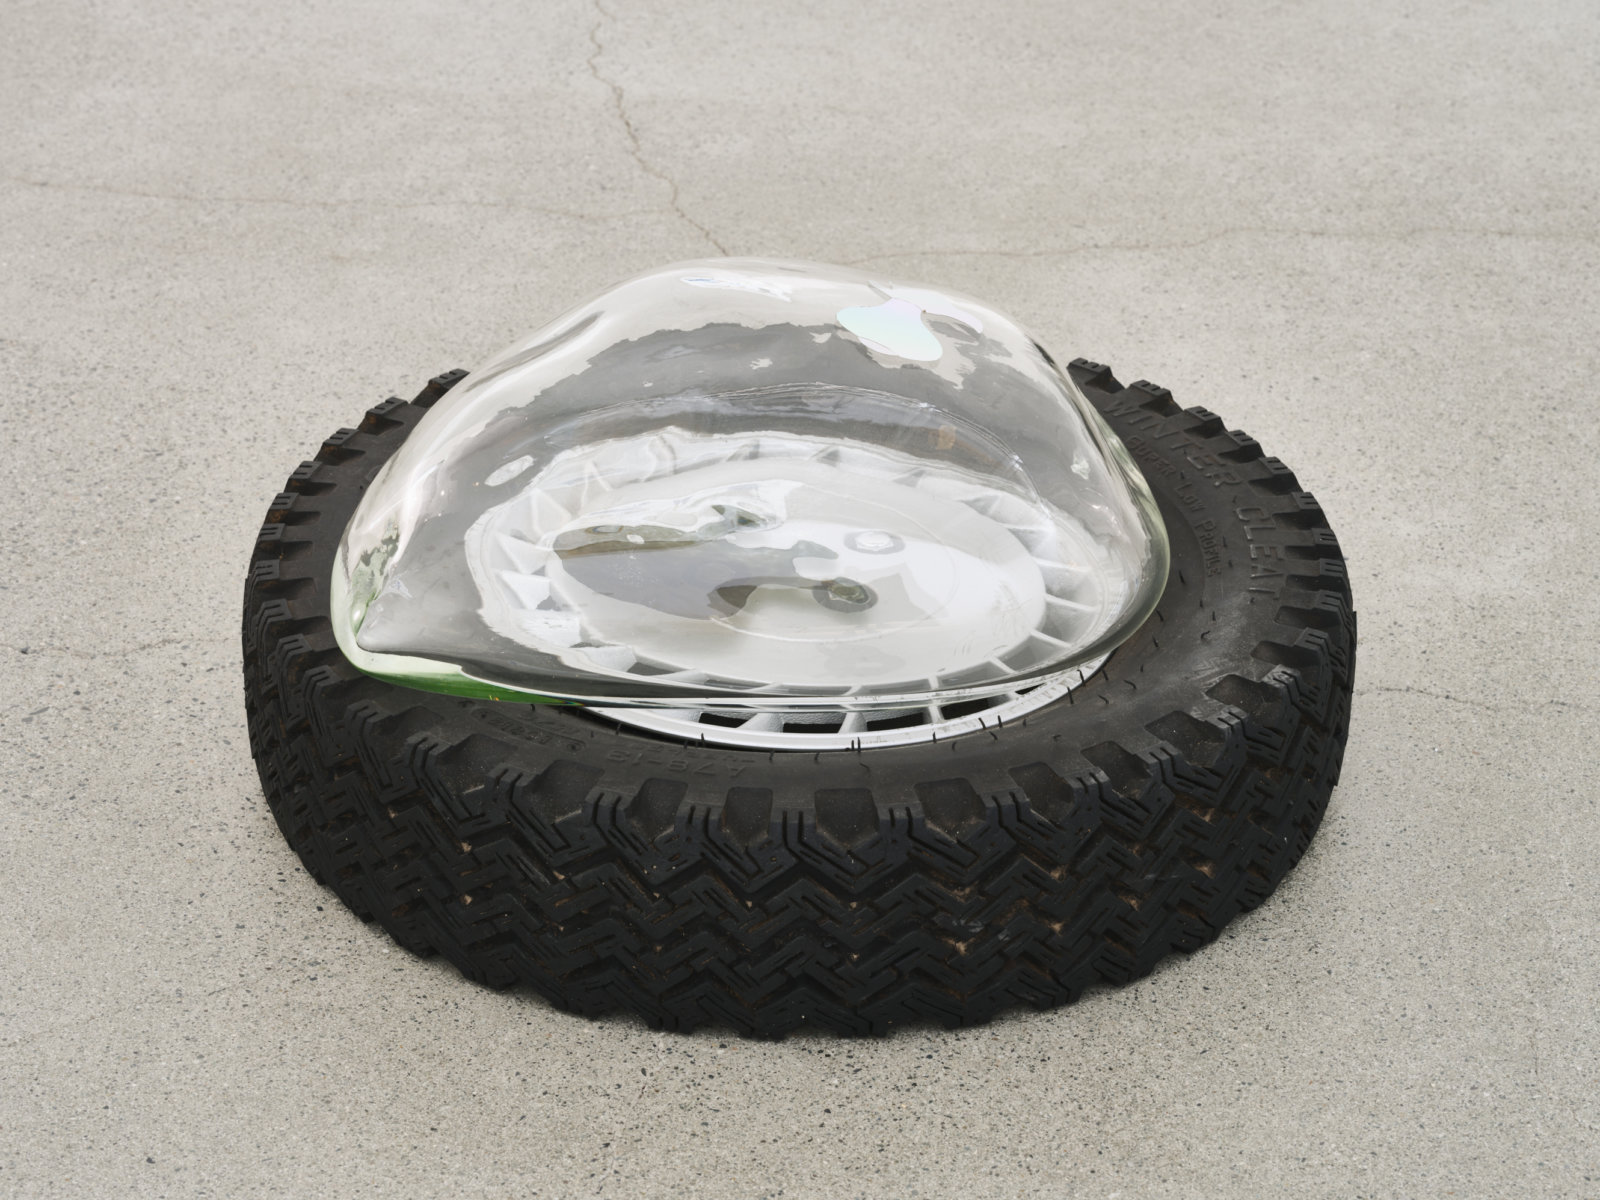 Jerry Pethick, Aerial View (detail), 2001–2002, tires, spectrafoil cut-outs, black silicone, blown glass, dimensions variable